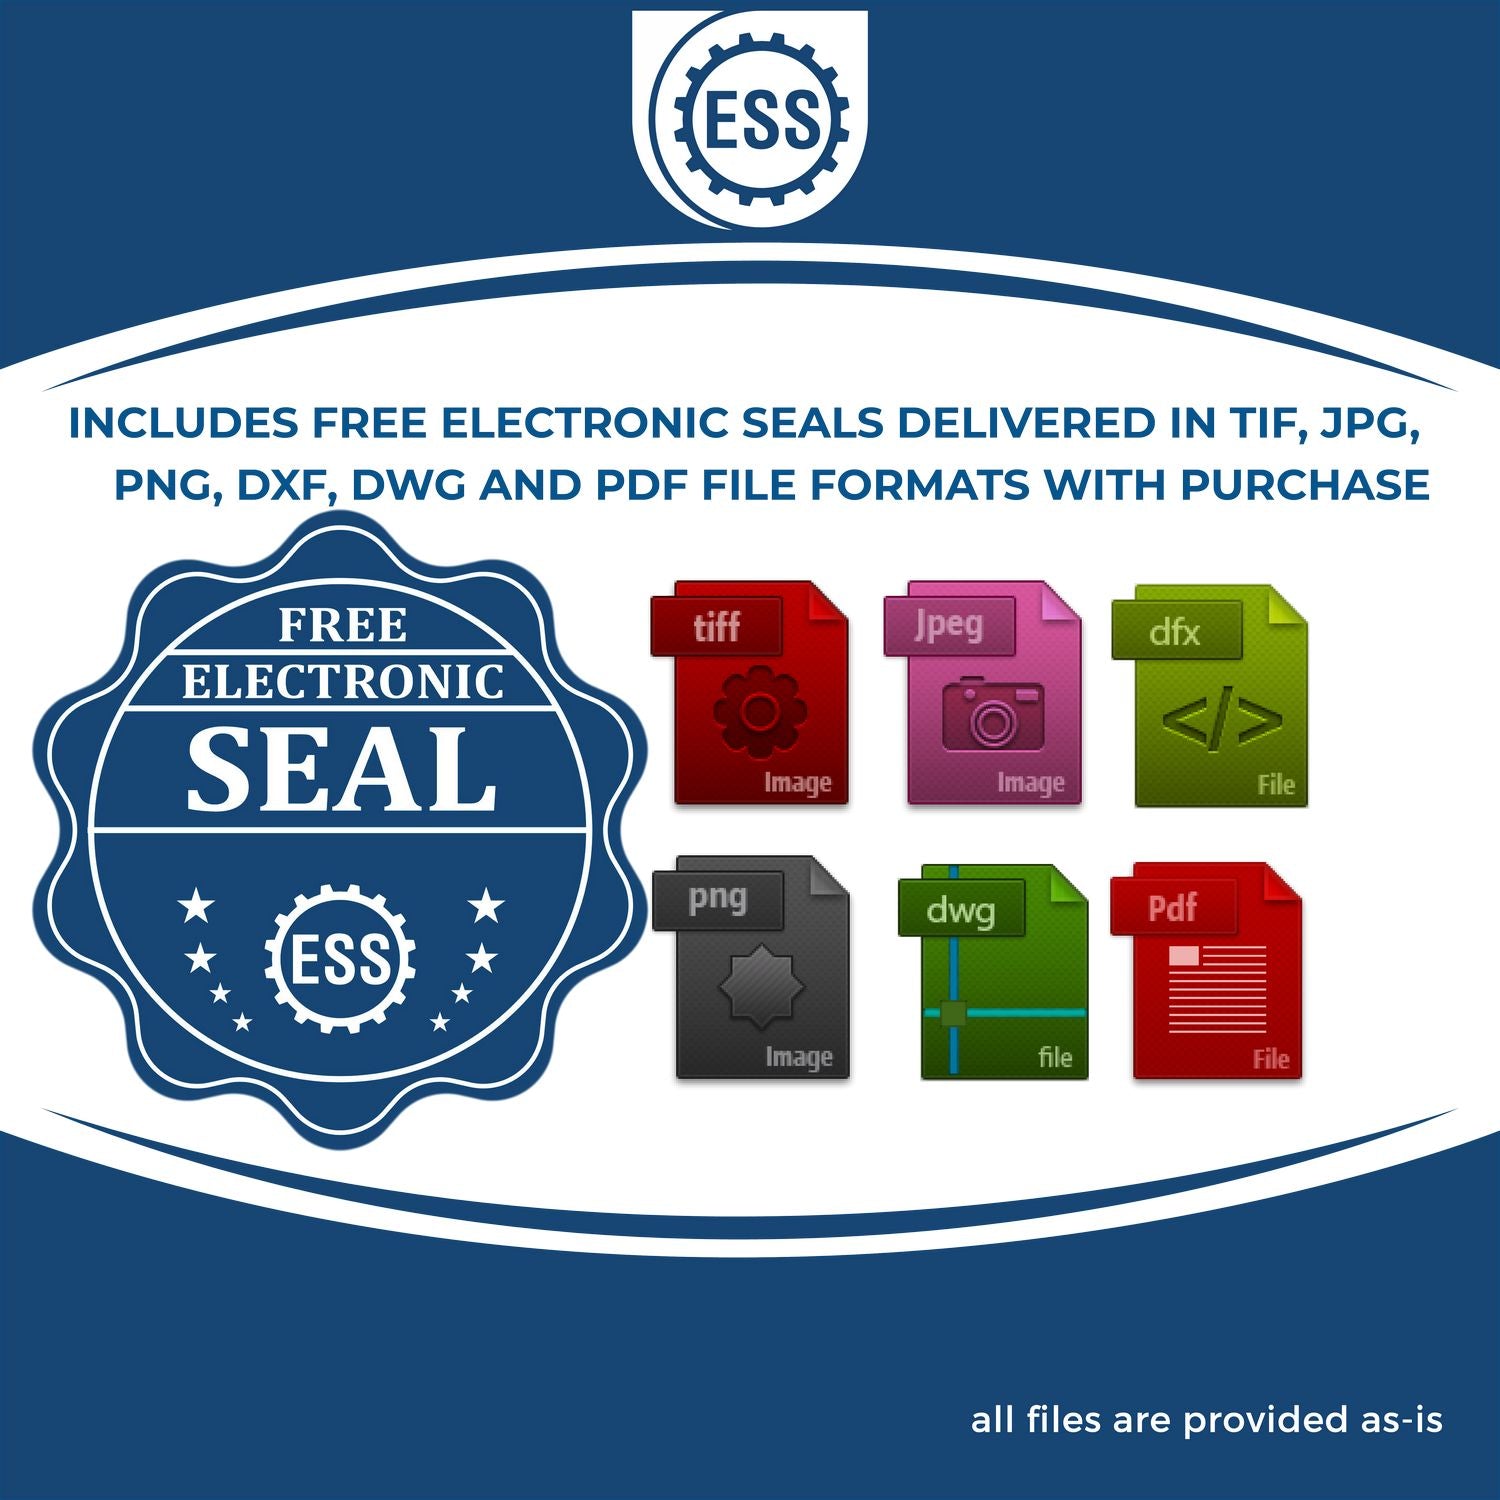 An infographic for the free electronic seal for the Self-Inking Nevada PE Stamp illustrating the different file type icons such as DXF, DWG, TIF, JPG and PNG.